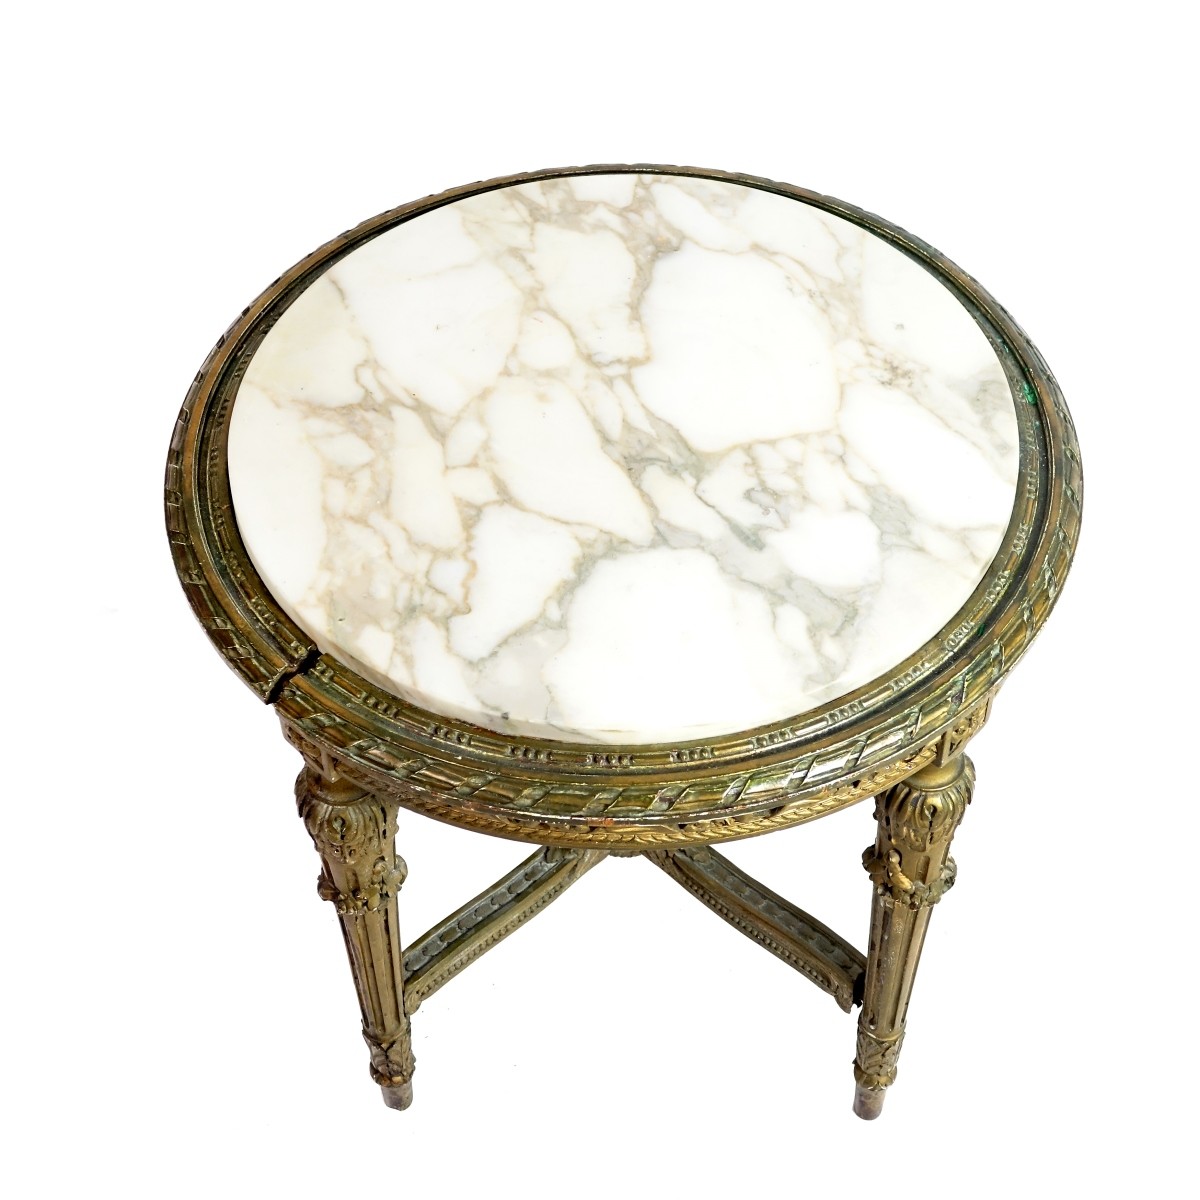 Antique French Louis XVI Style Side Table